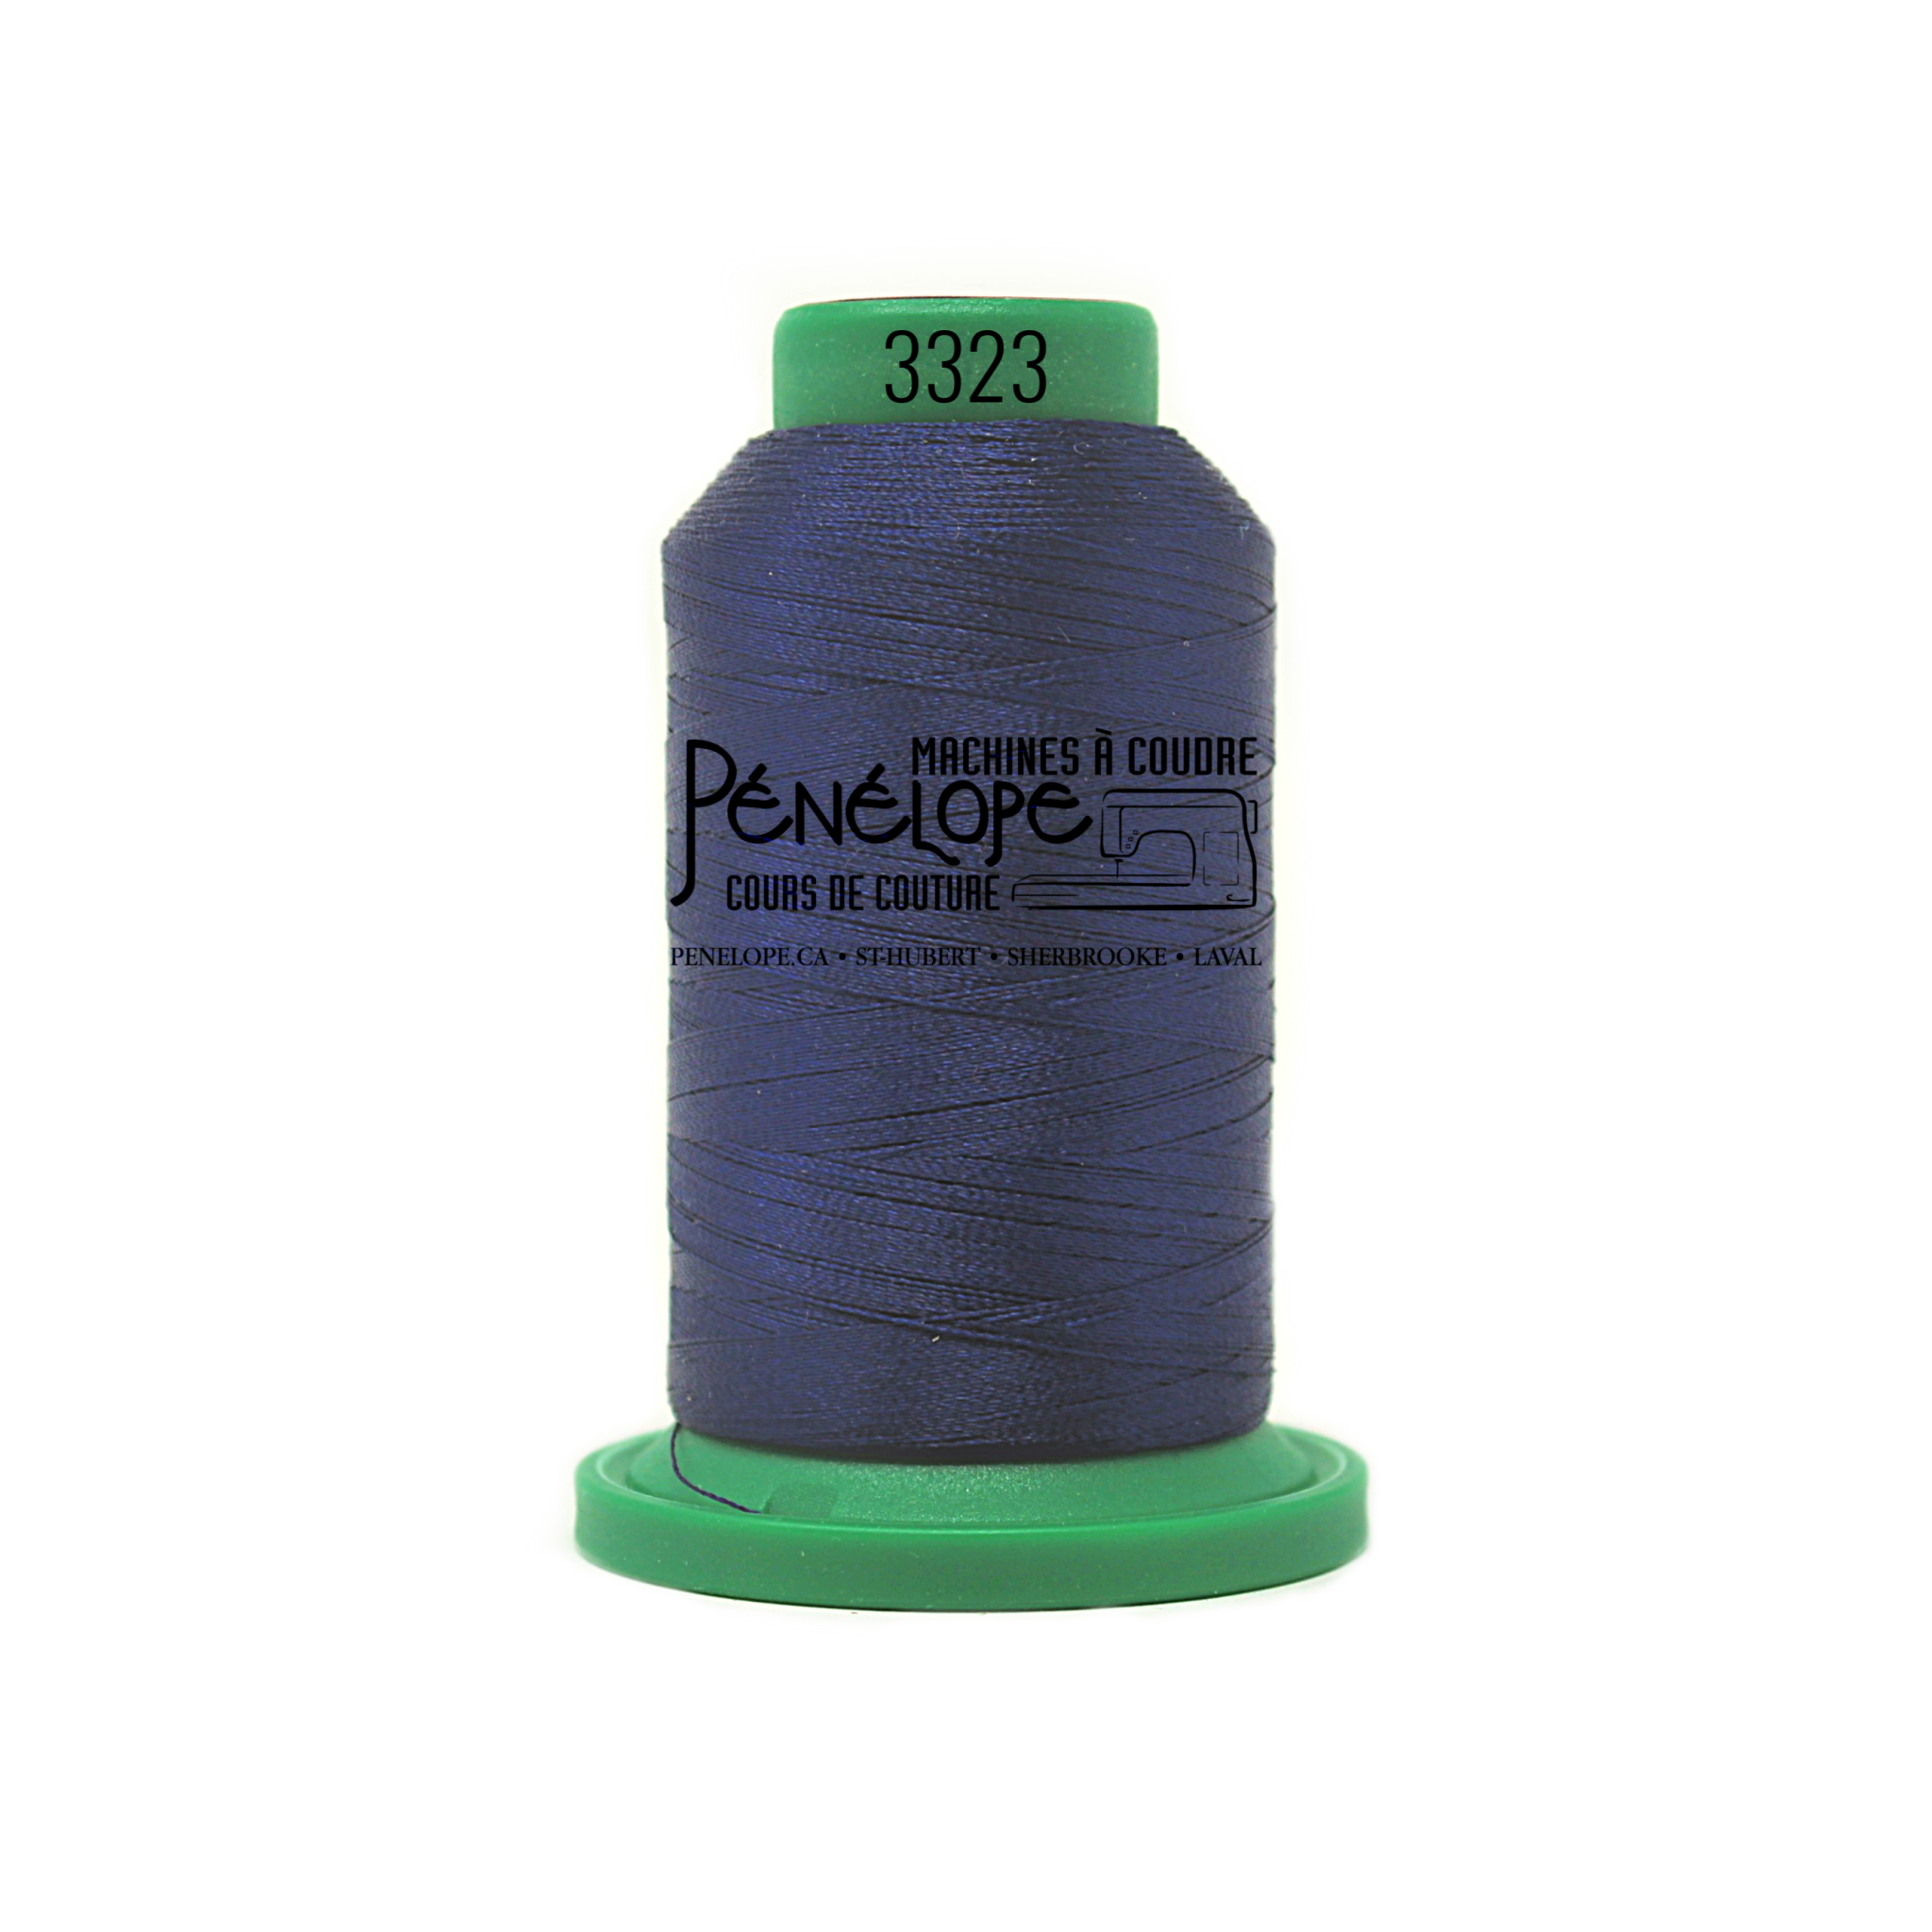 Isacord Isacord sewing and embroidery thread 3323